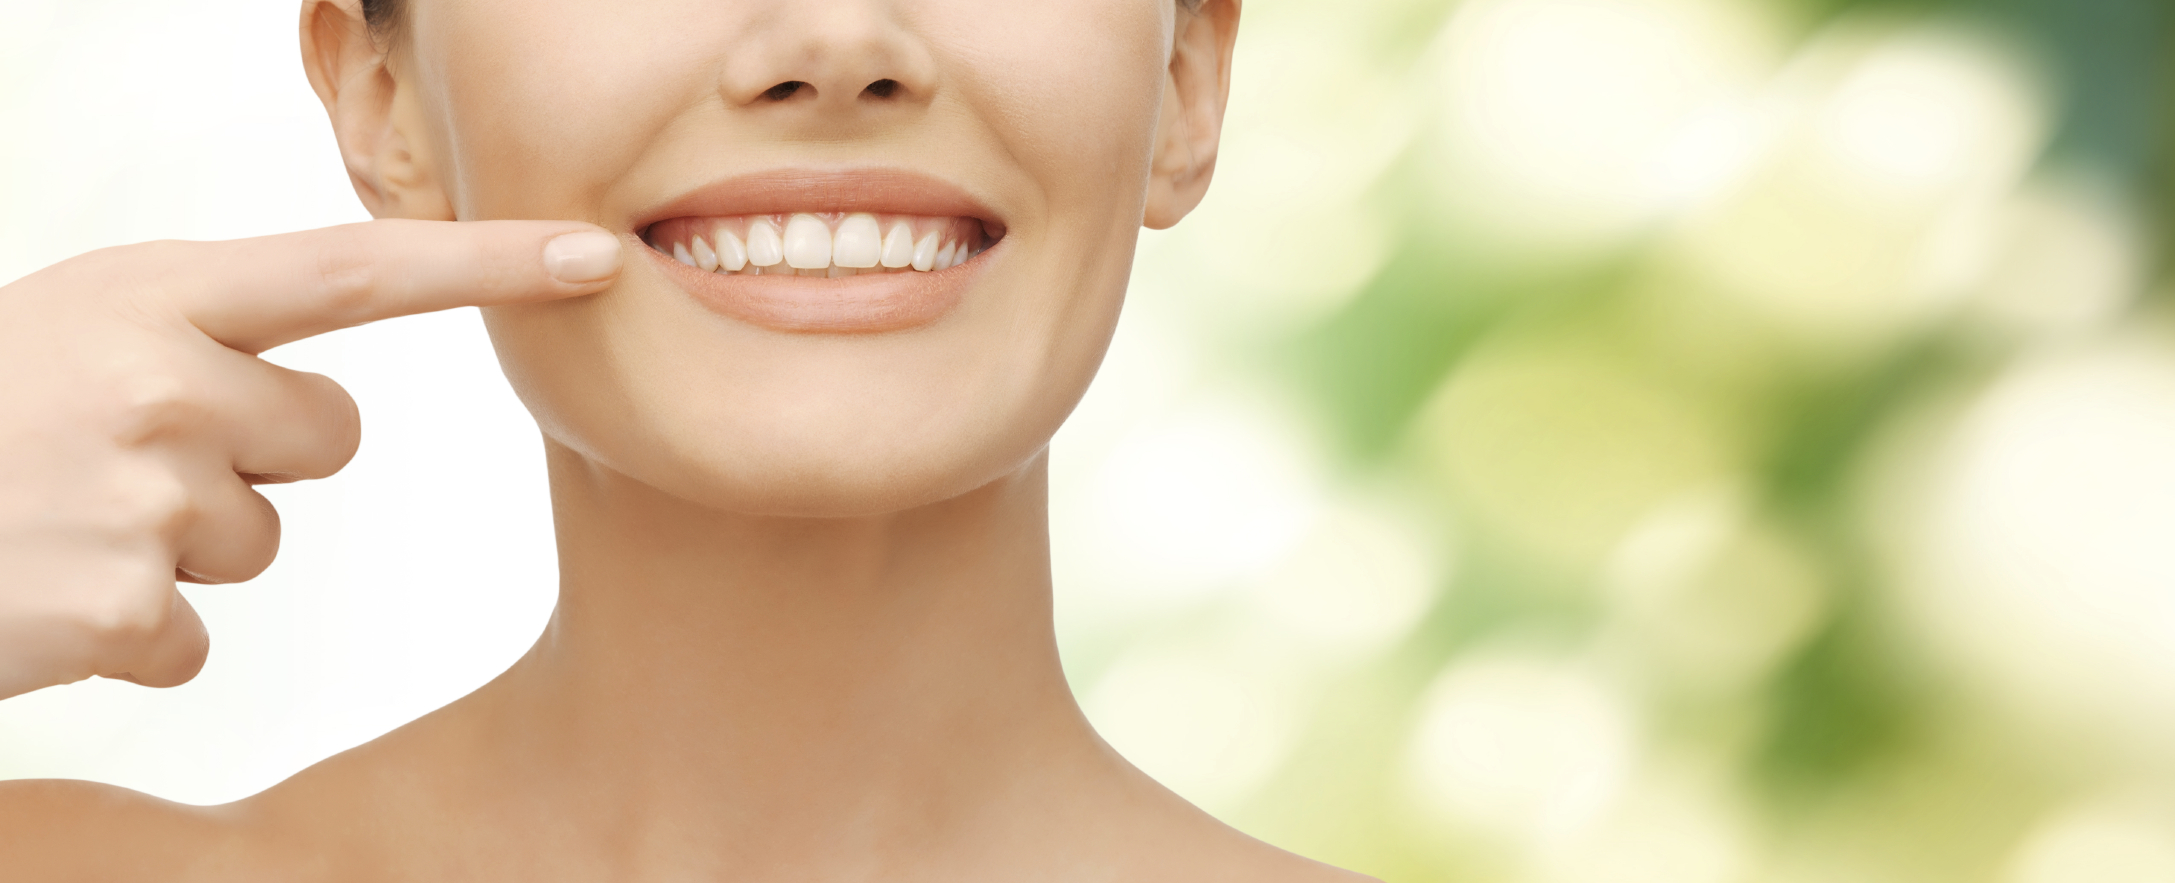 Other Options to Obtain Whiter Teeth